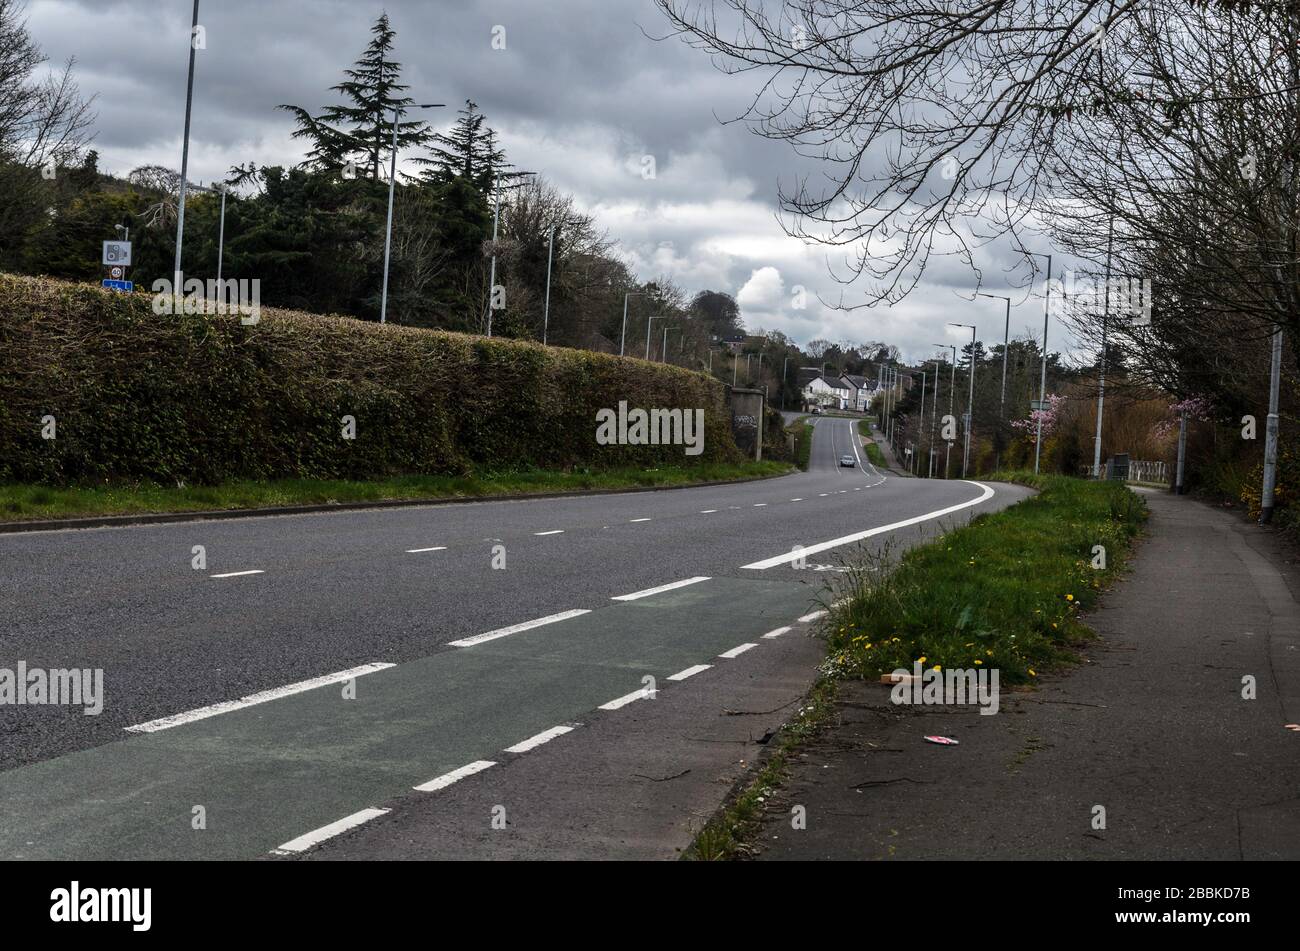 Belfast, Co Down /Northern Ireland - March 31st 2020 Lockdown in Castlereagh, Dual carriageway devoid of traffic during ongoing covid-19 pandemic Stock Photo